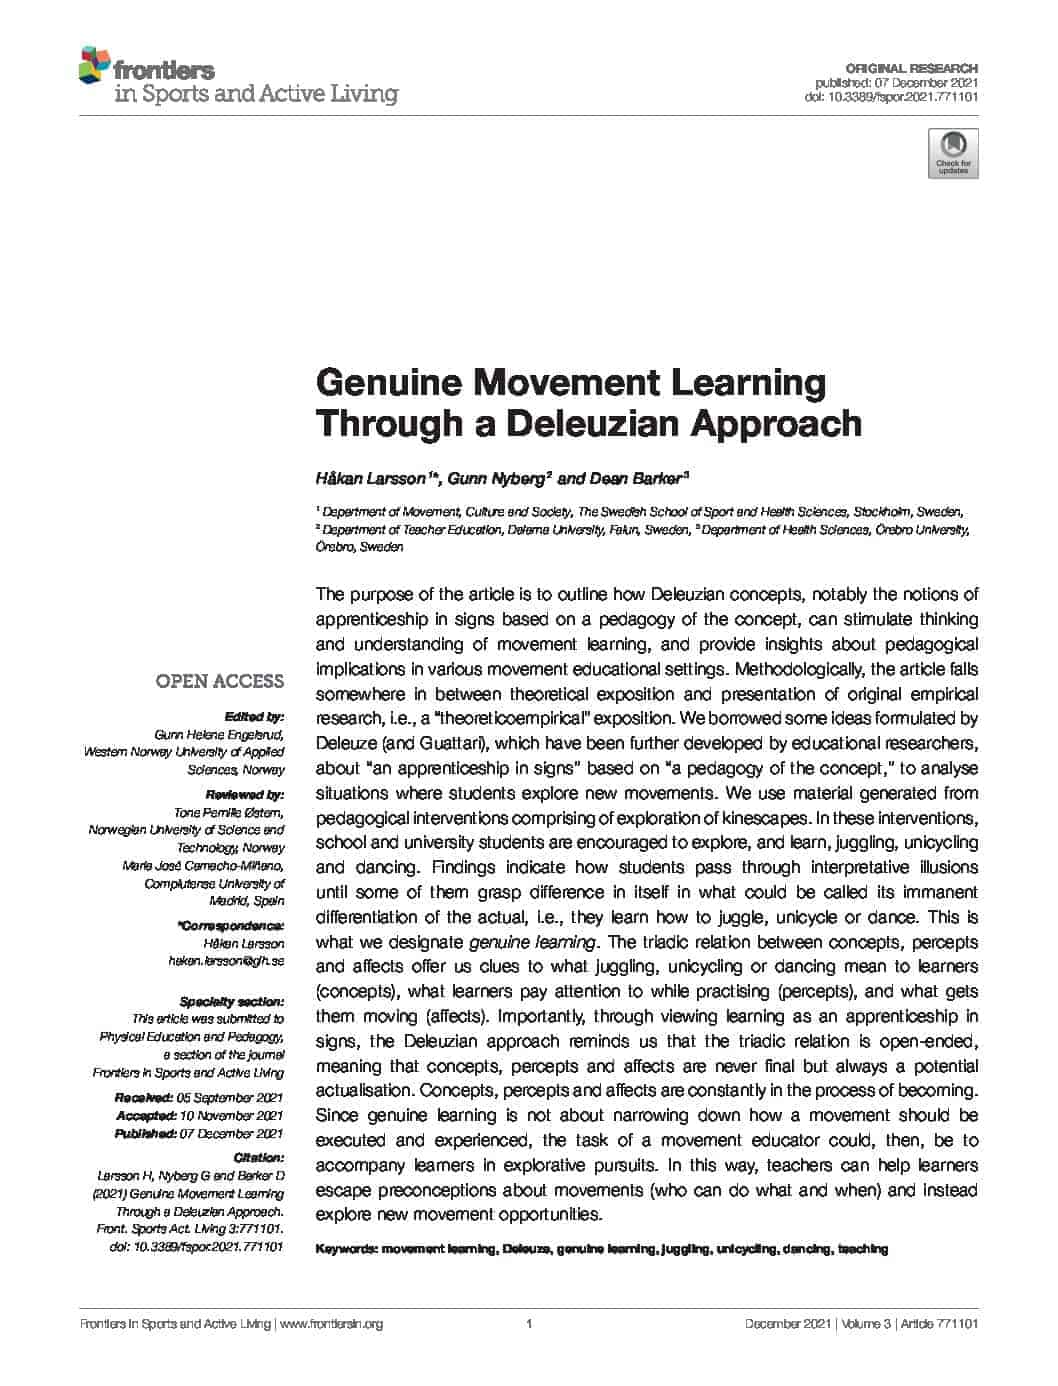 Featured image for “Genuine Movement Learning Through a Deleuzian Approach”